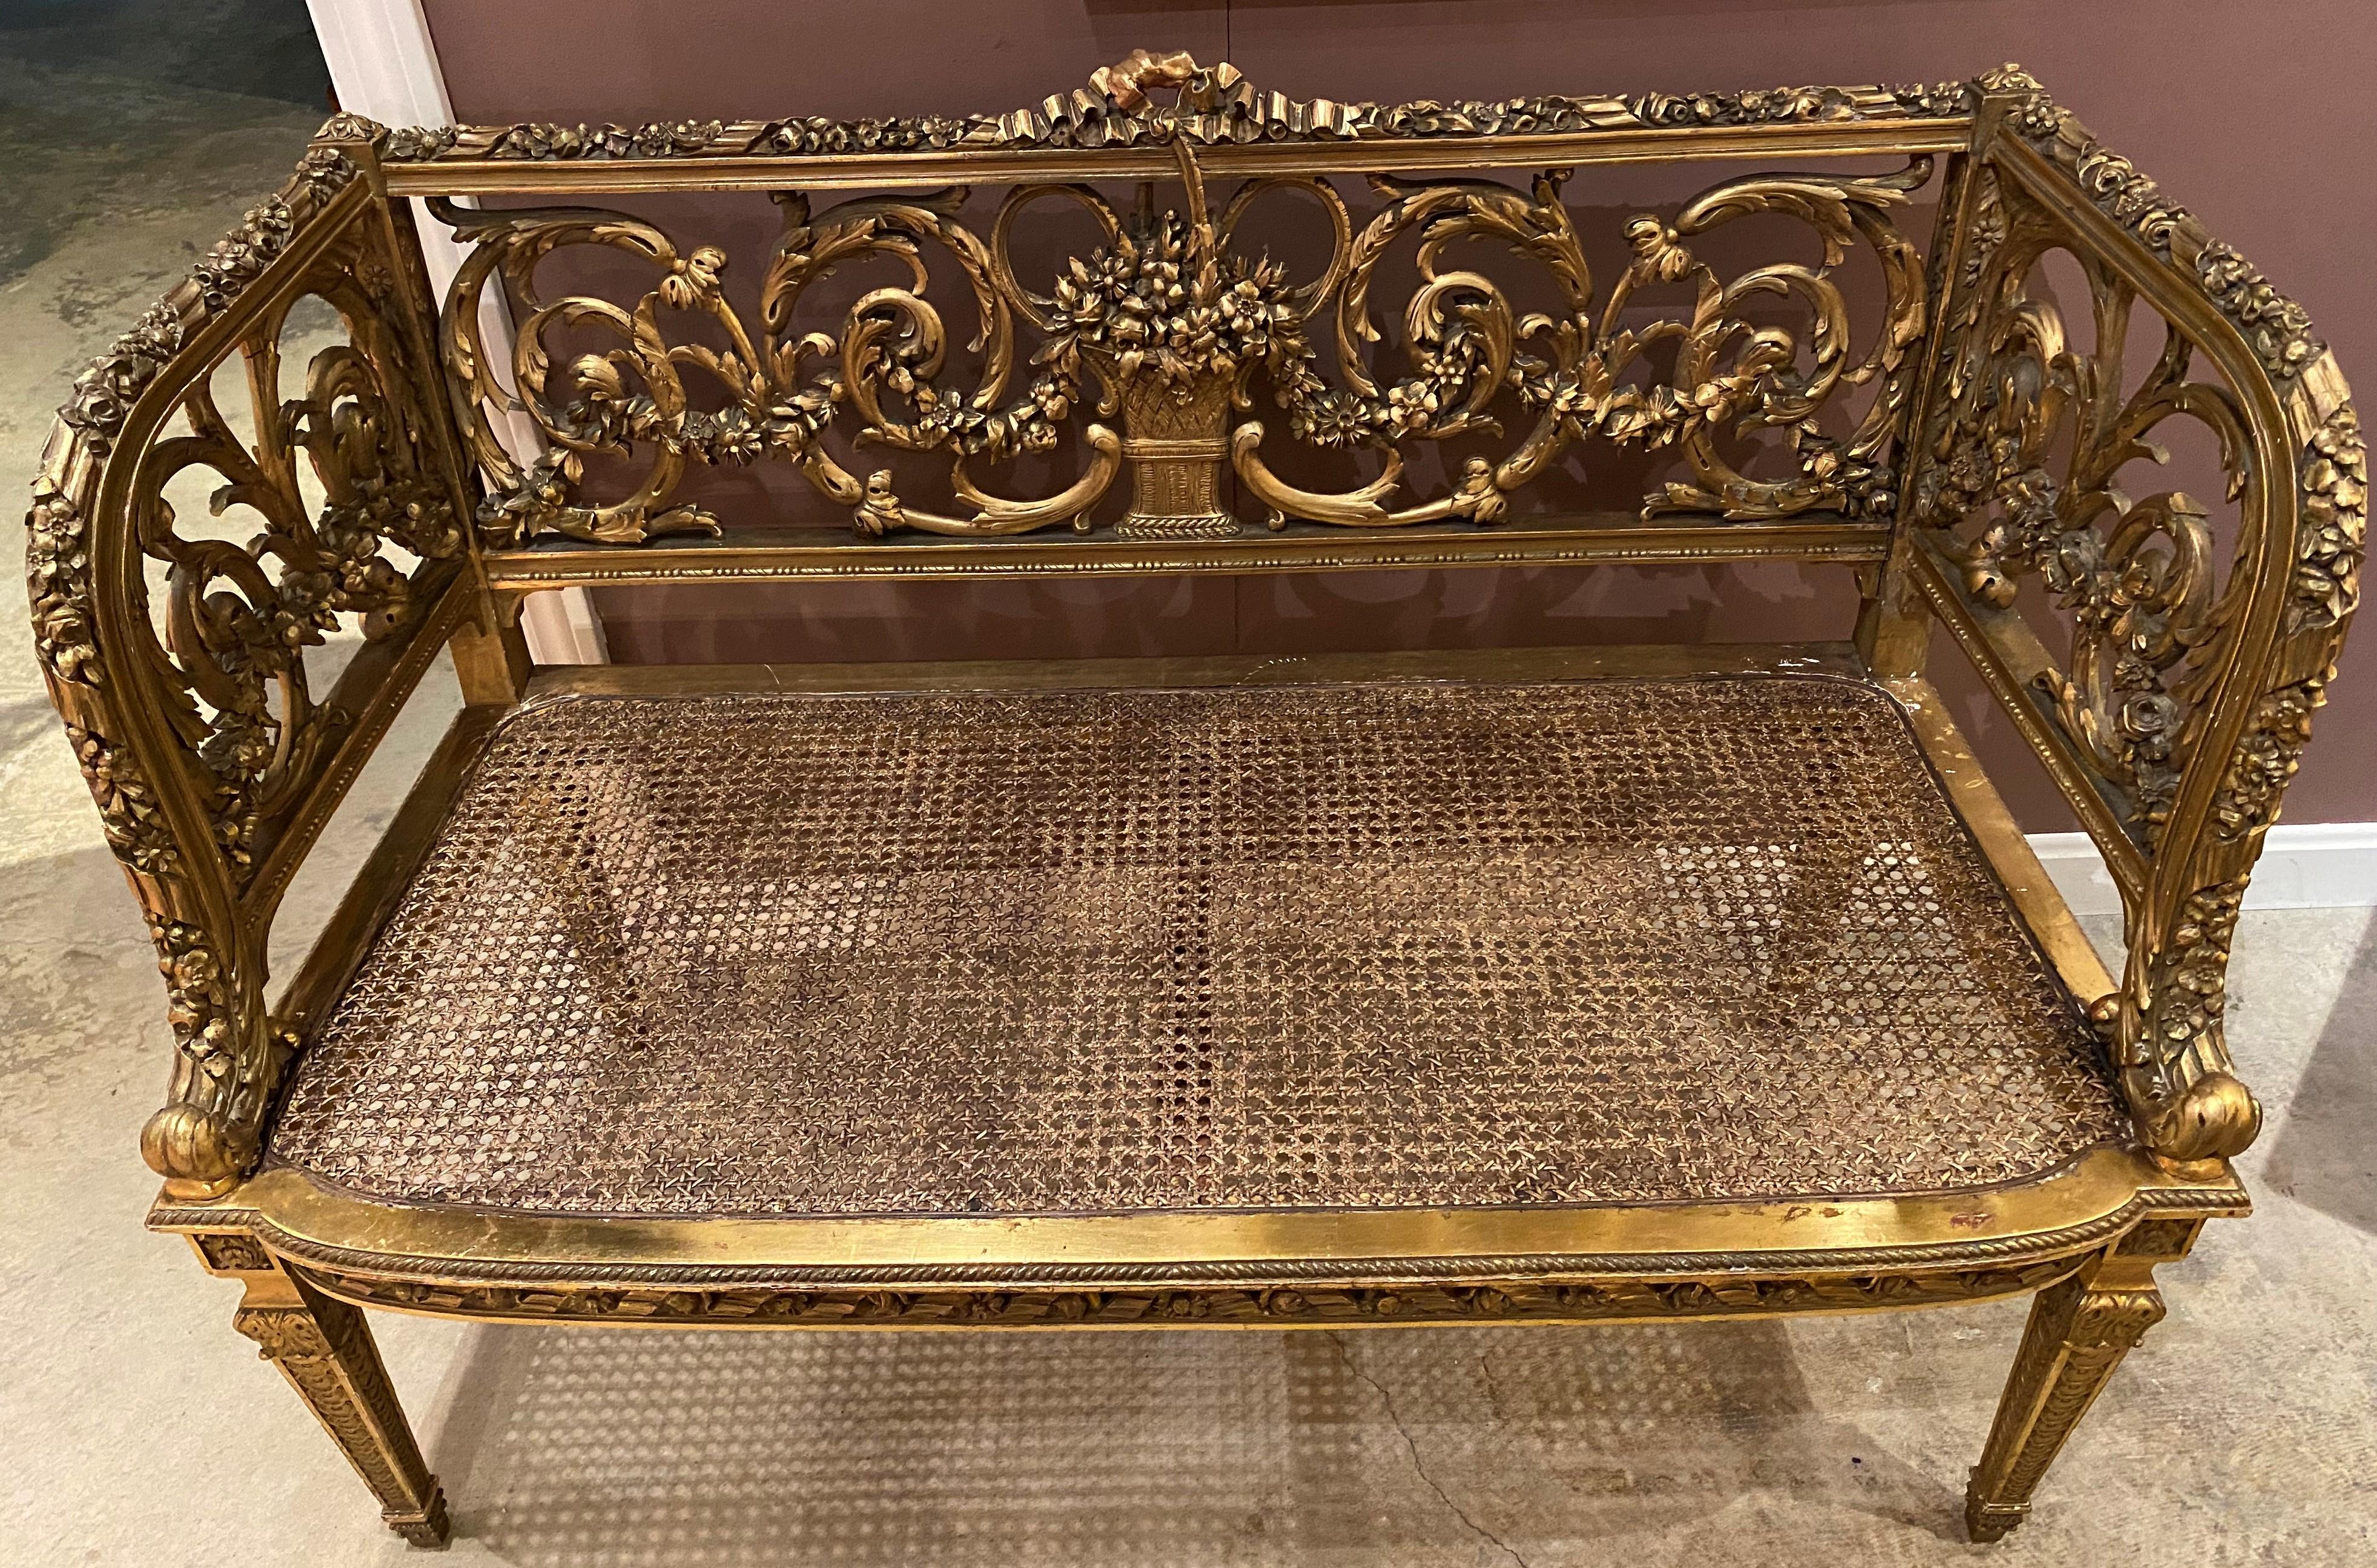 An exceptional reticulated scroll and foliate carved giltwood French Louis XVI style settee with ribbon carved crest, flower basket back decoration, and newly caned seat, all supported by four detail carved square tapered legs and a newly